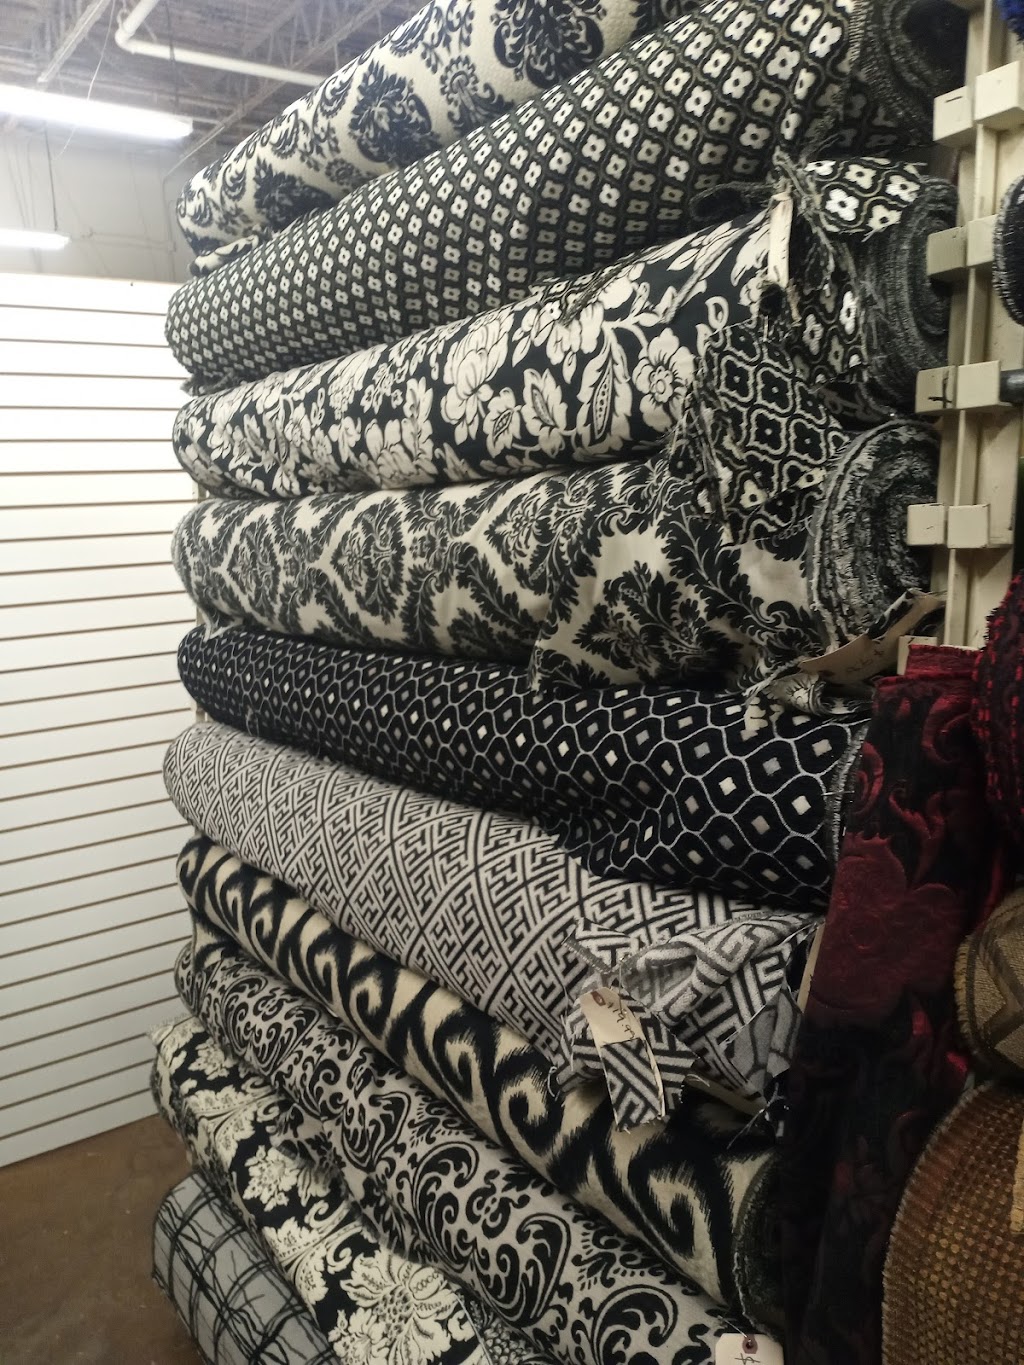 Five Star Fabric | 15408 Midway Rd, Addison, TX 75001, USA | Phone: (972) 607-0244